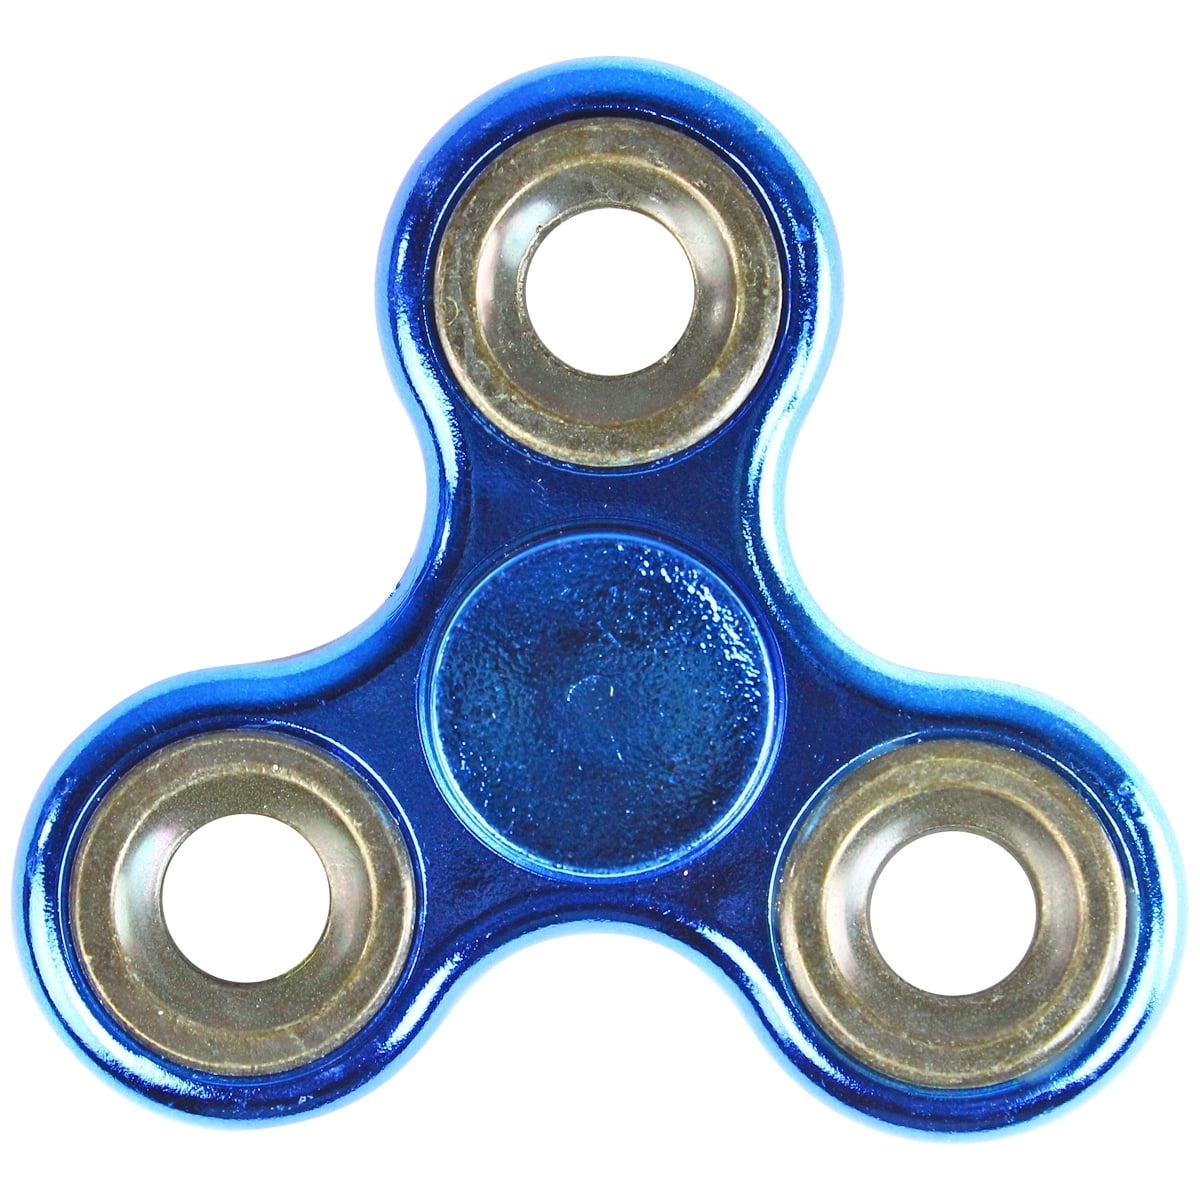 Metallic Silver Color TRI Spinner HAND  FIDGET TOY EDC AUTISM ADHD